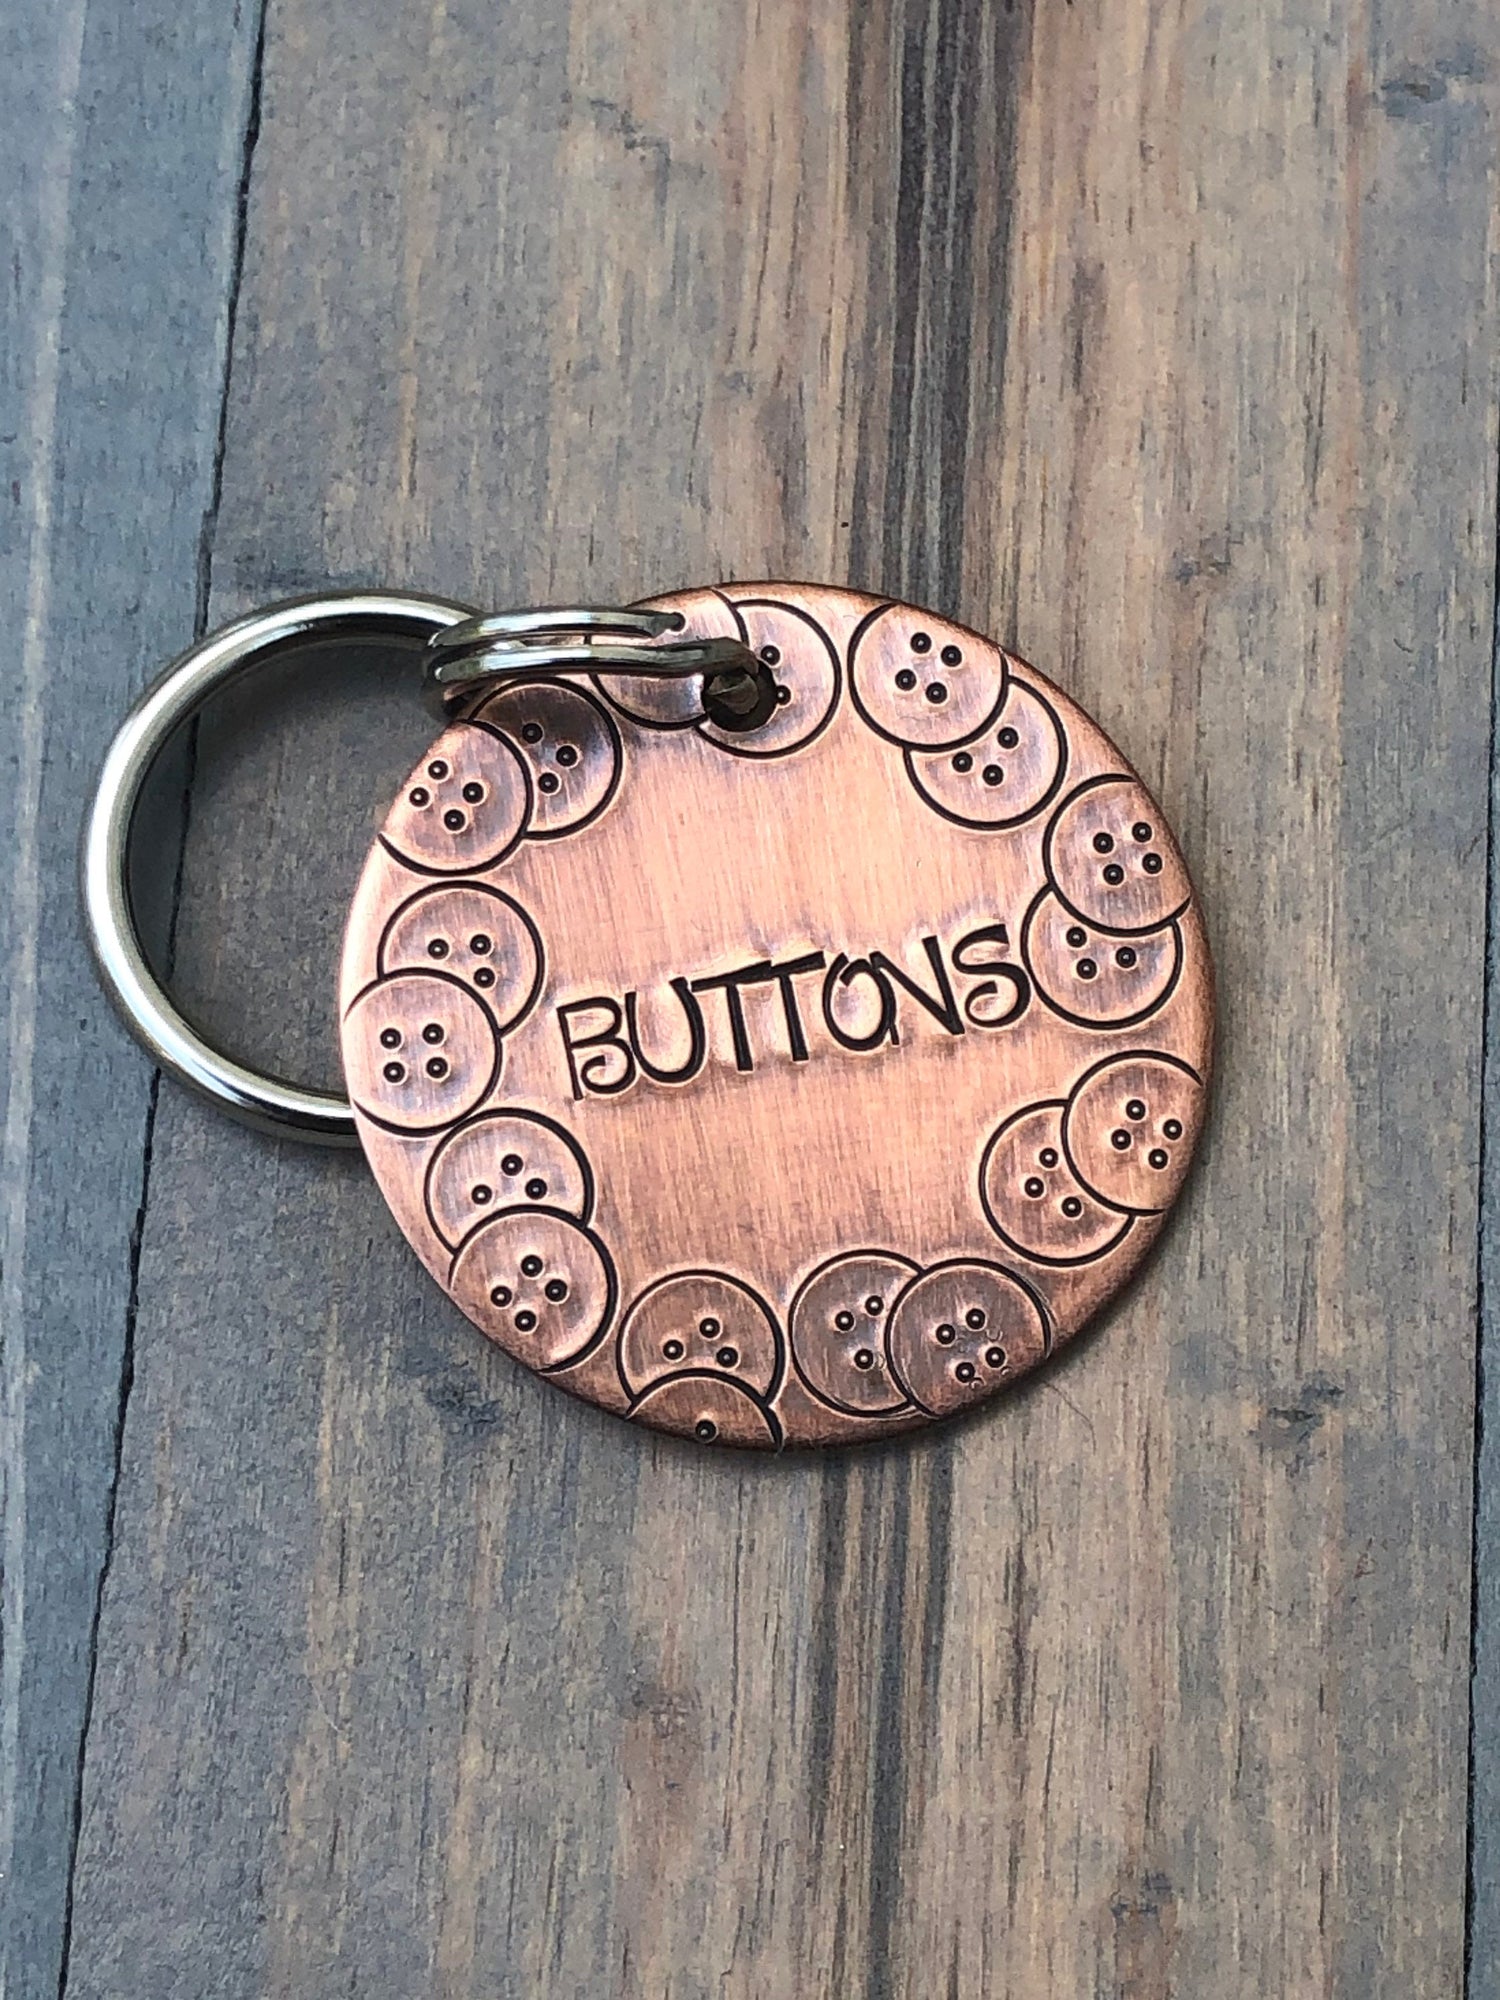 Name Tag for Dog, Hand Stamped Pet ID Tag, Buttons, Dog Tag with Button, Personalized Dog Tag for Dog, Whimsical Dog Tag